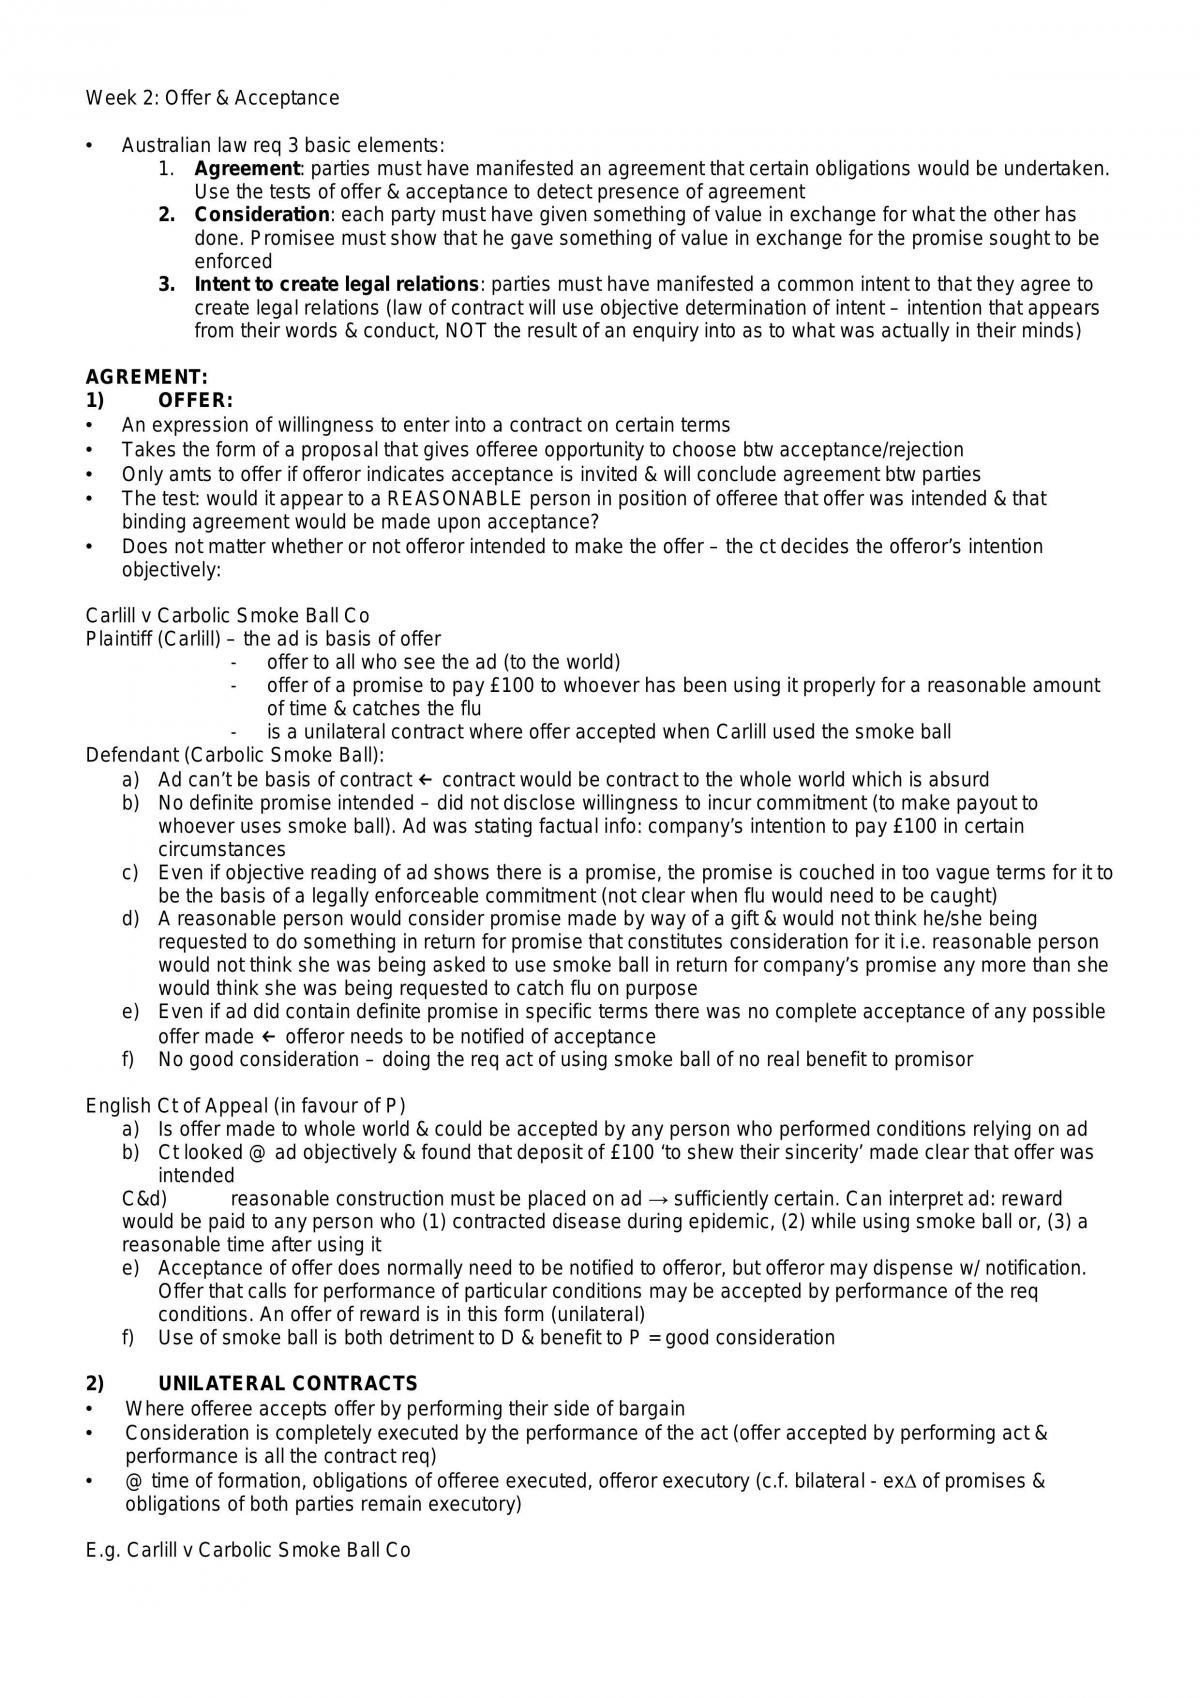 Offer & Acceptance Notes - Page 1